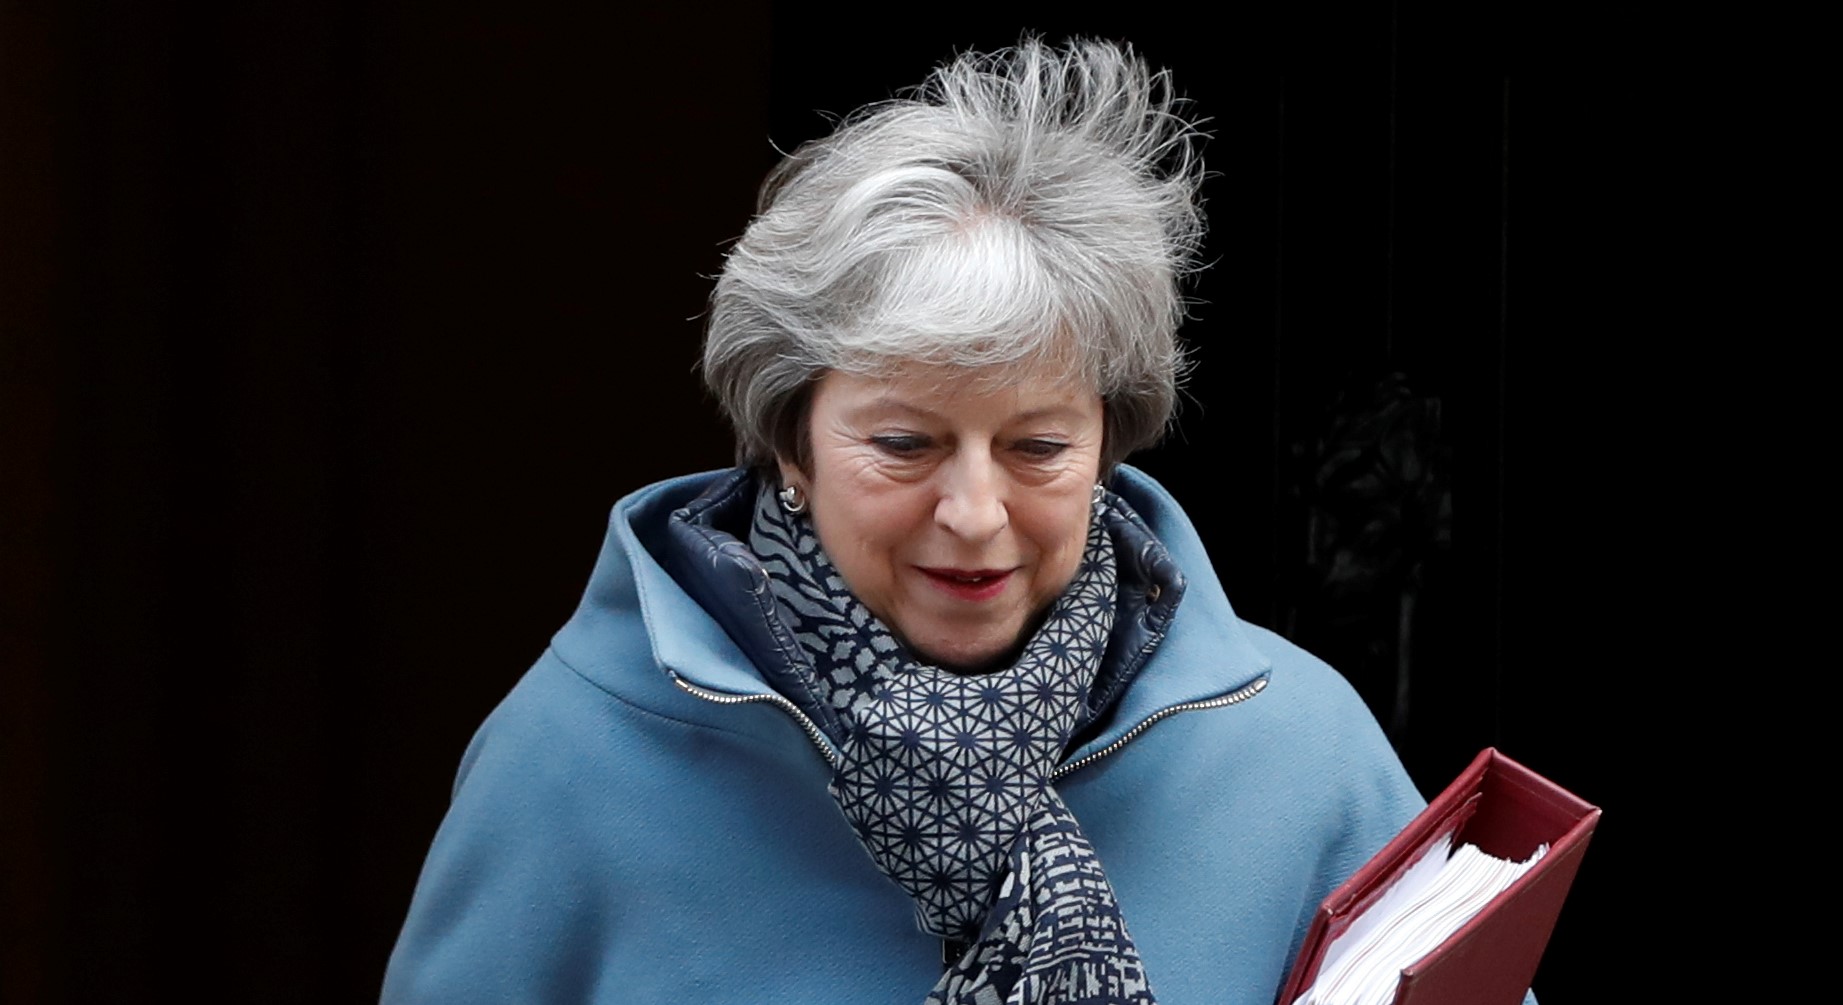 UPDATE 1-UK PM May will seek "pragmatic" solution to Brexit deal in Brussels